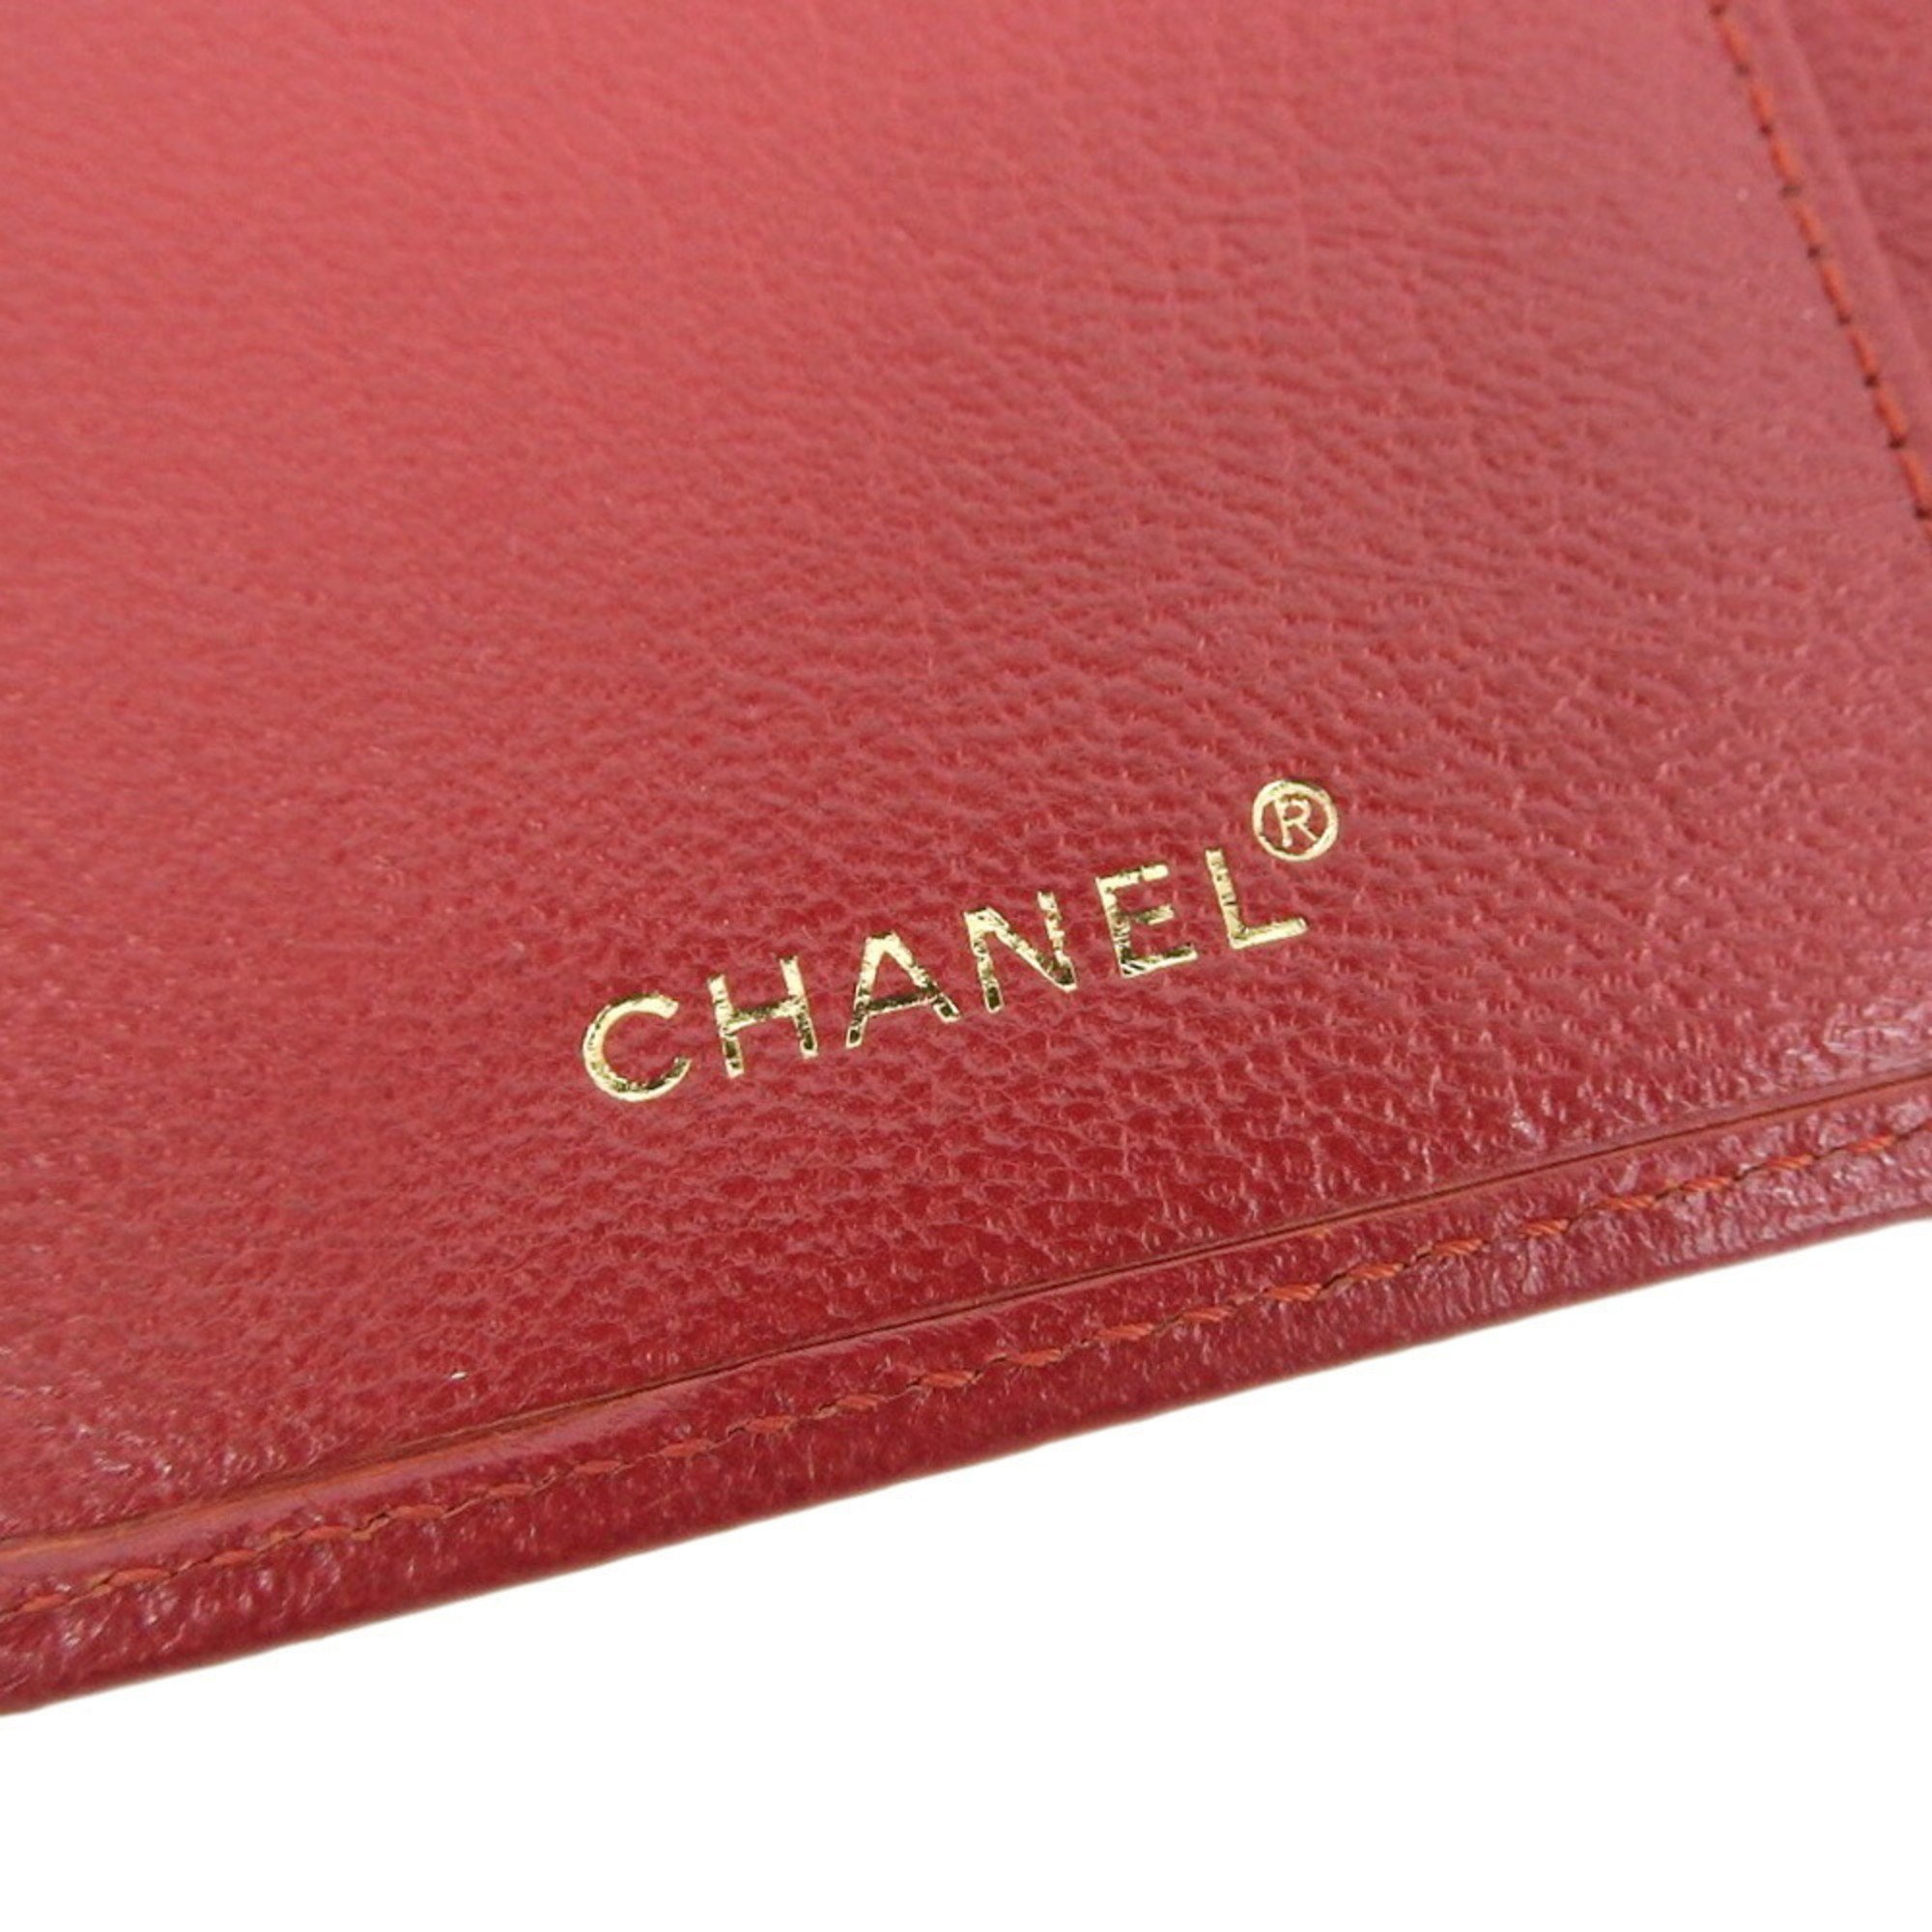 Chanel CHANEL here mark logo bi-fold long wallet leather red gold metal fittings A11866 with seal 6 series